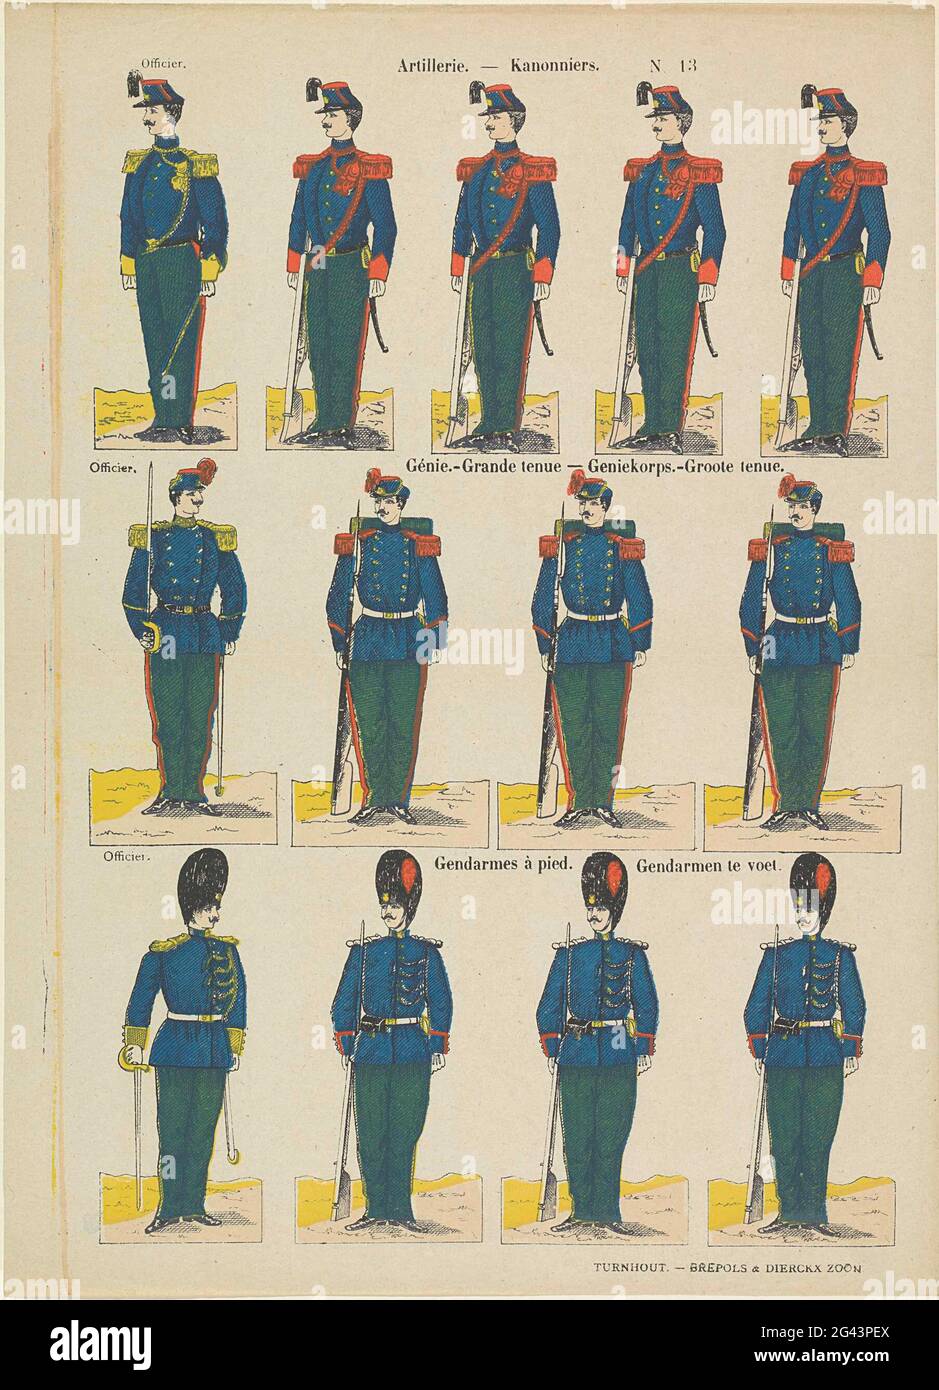 Artillery / guns / génie.-Grande Utue / Geniekorps Groote Toue / Gendarmes à pied / gendarmen on foot. Sheet with 3 horizontal rows with a total of 13 performances of officers and soldiers with guns. Numbered at the top right: N. 13. Stock Photo